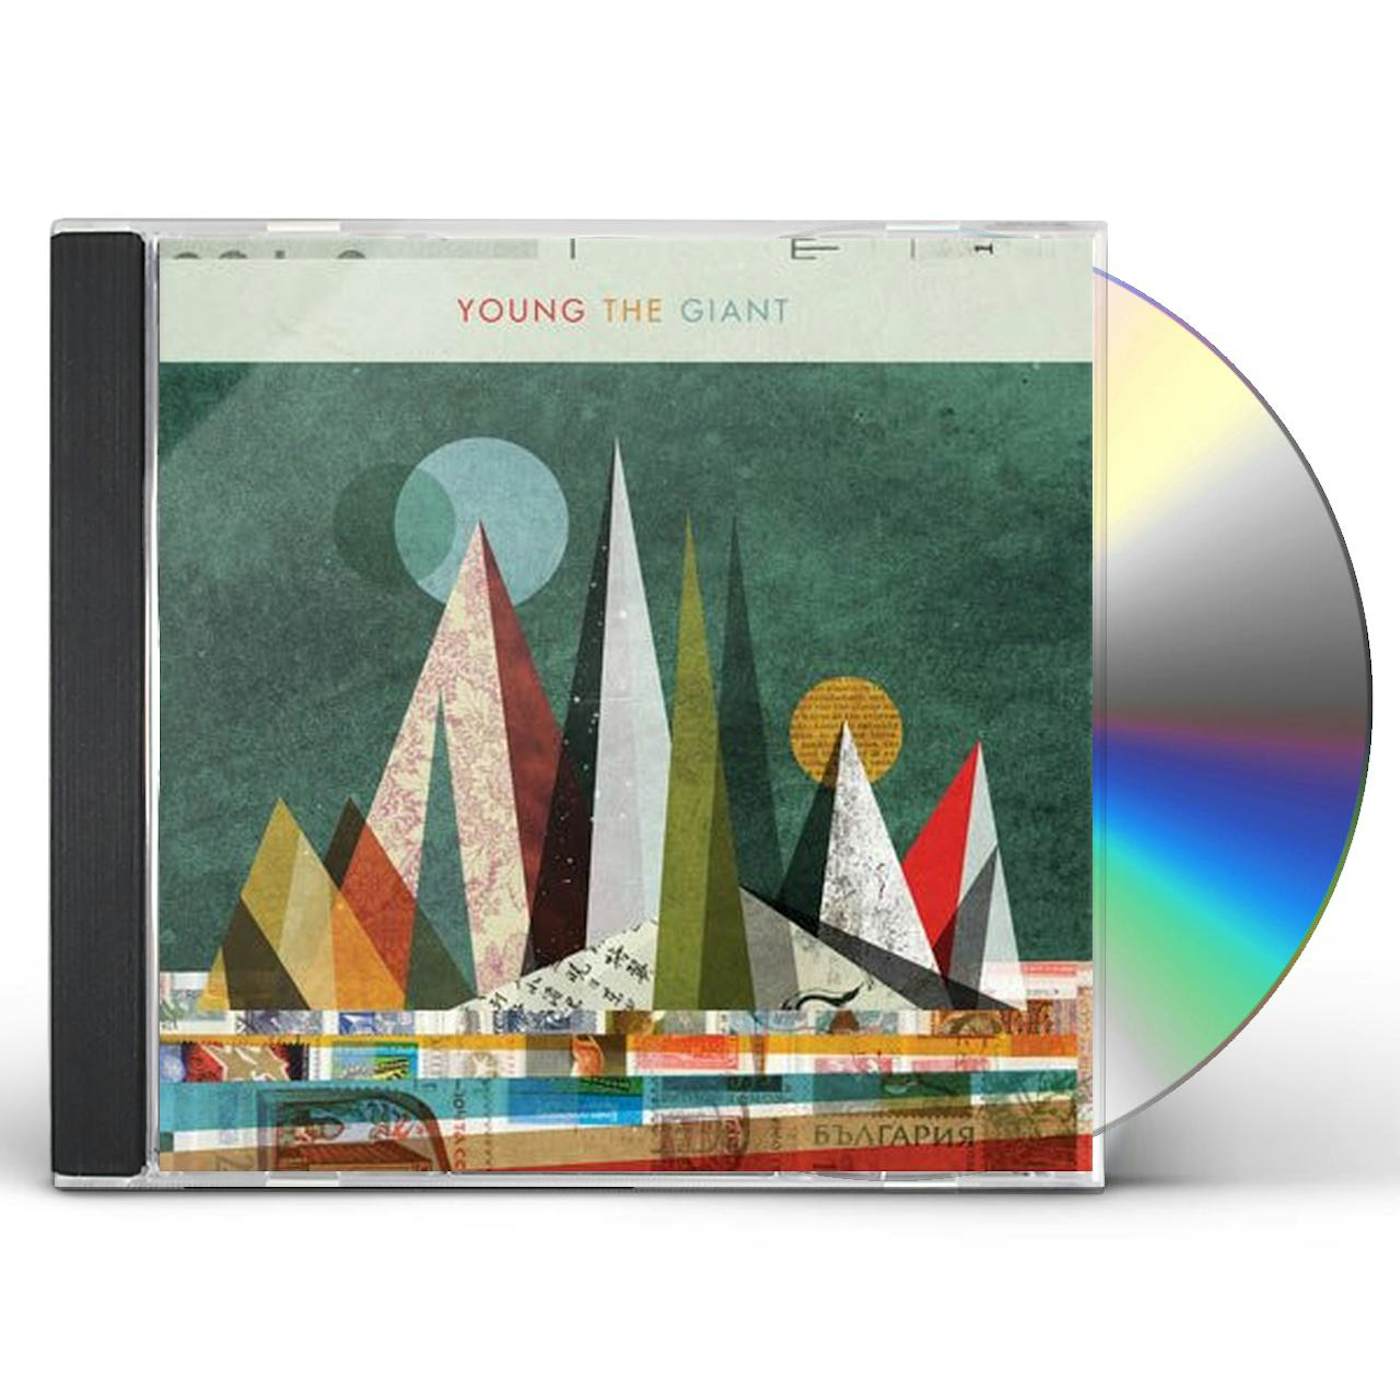 YOUNG THE GIANT CD